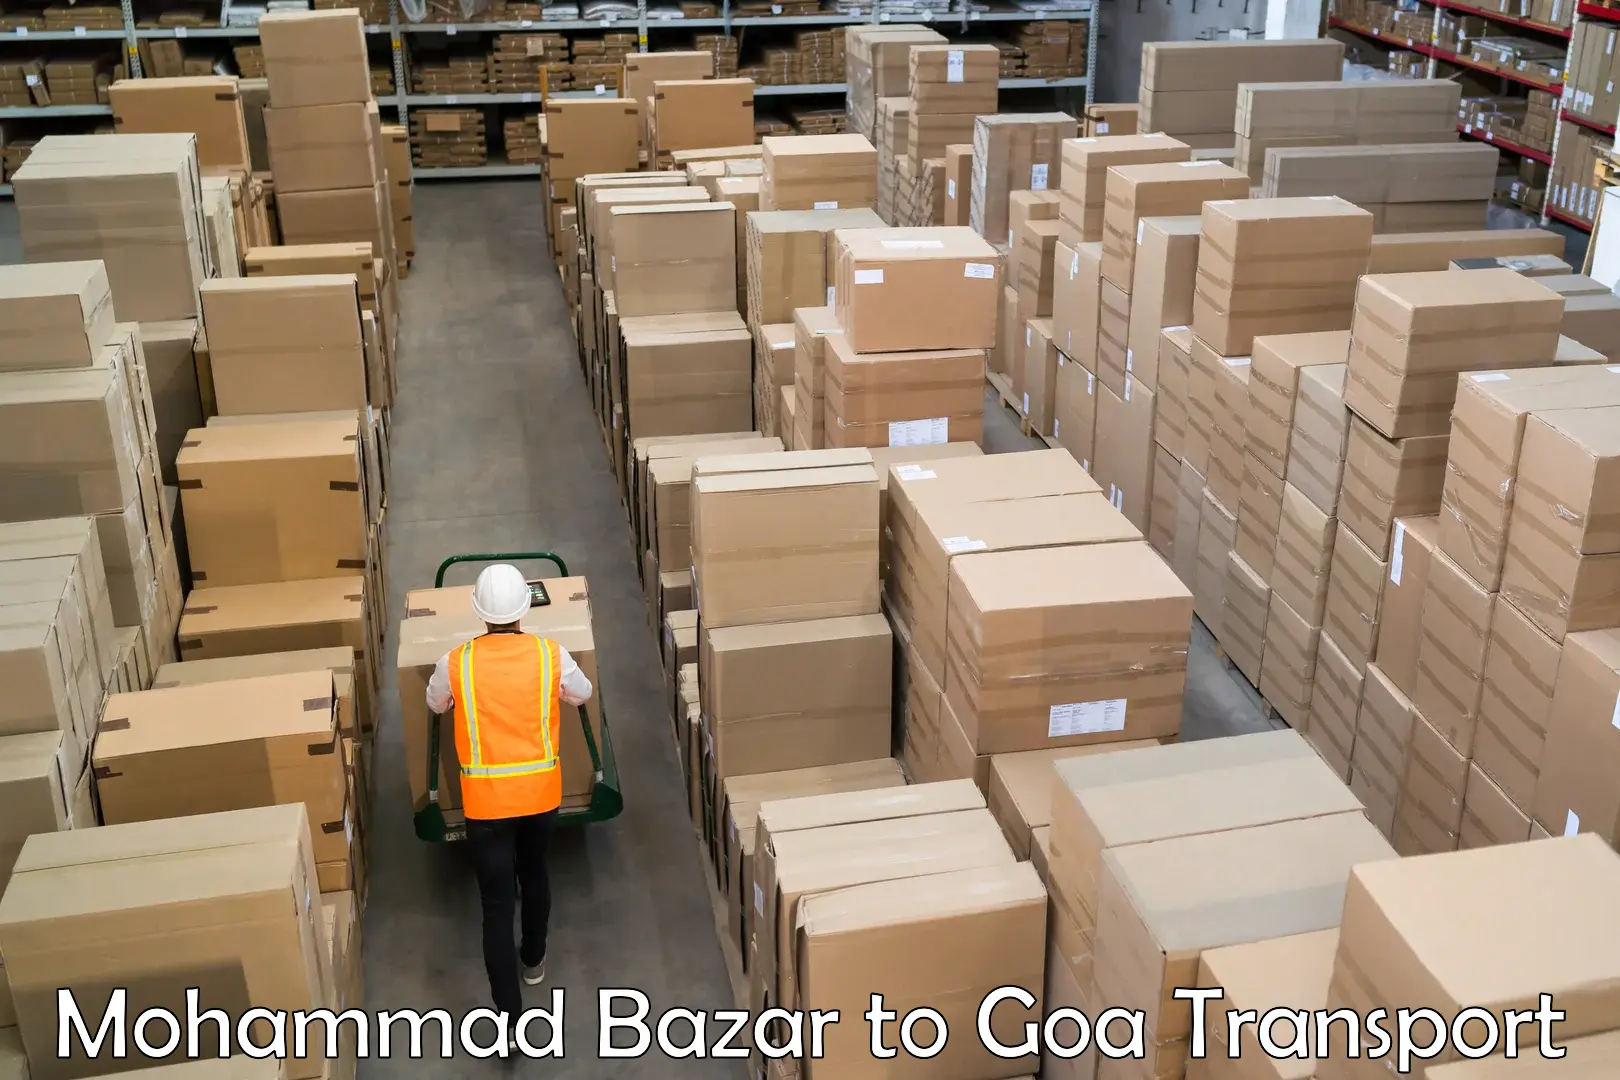 Delivery service Mohammad Bazar to South Goa